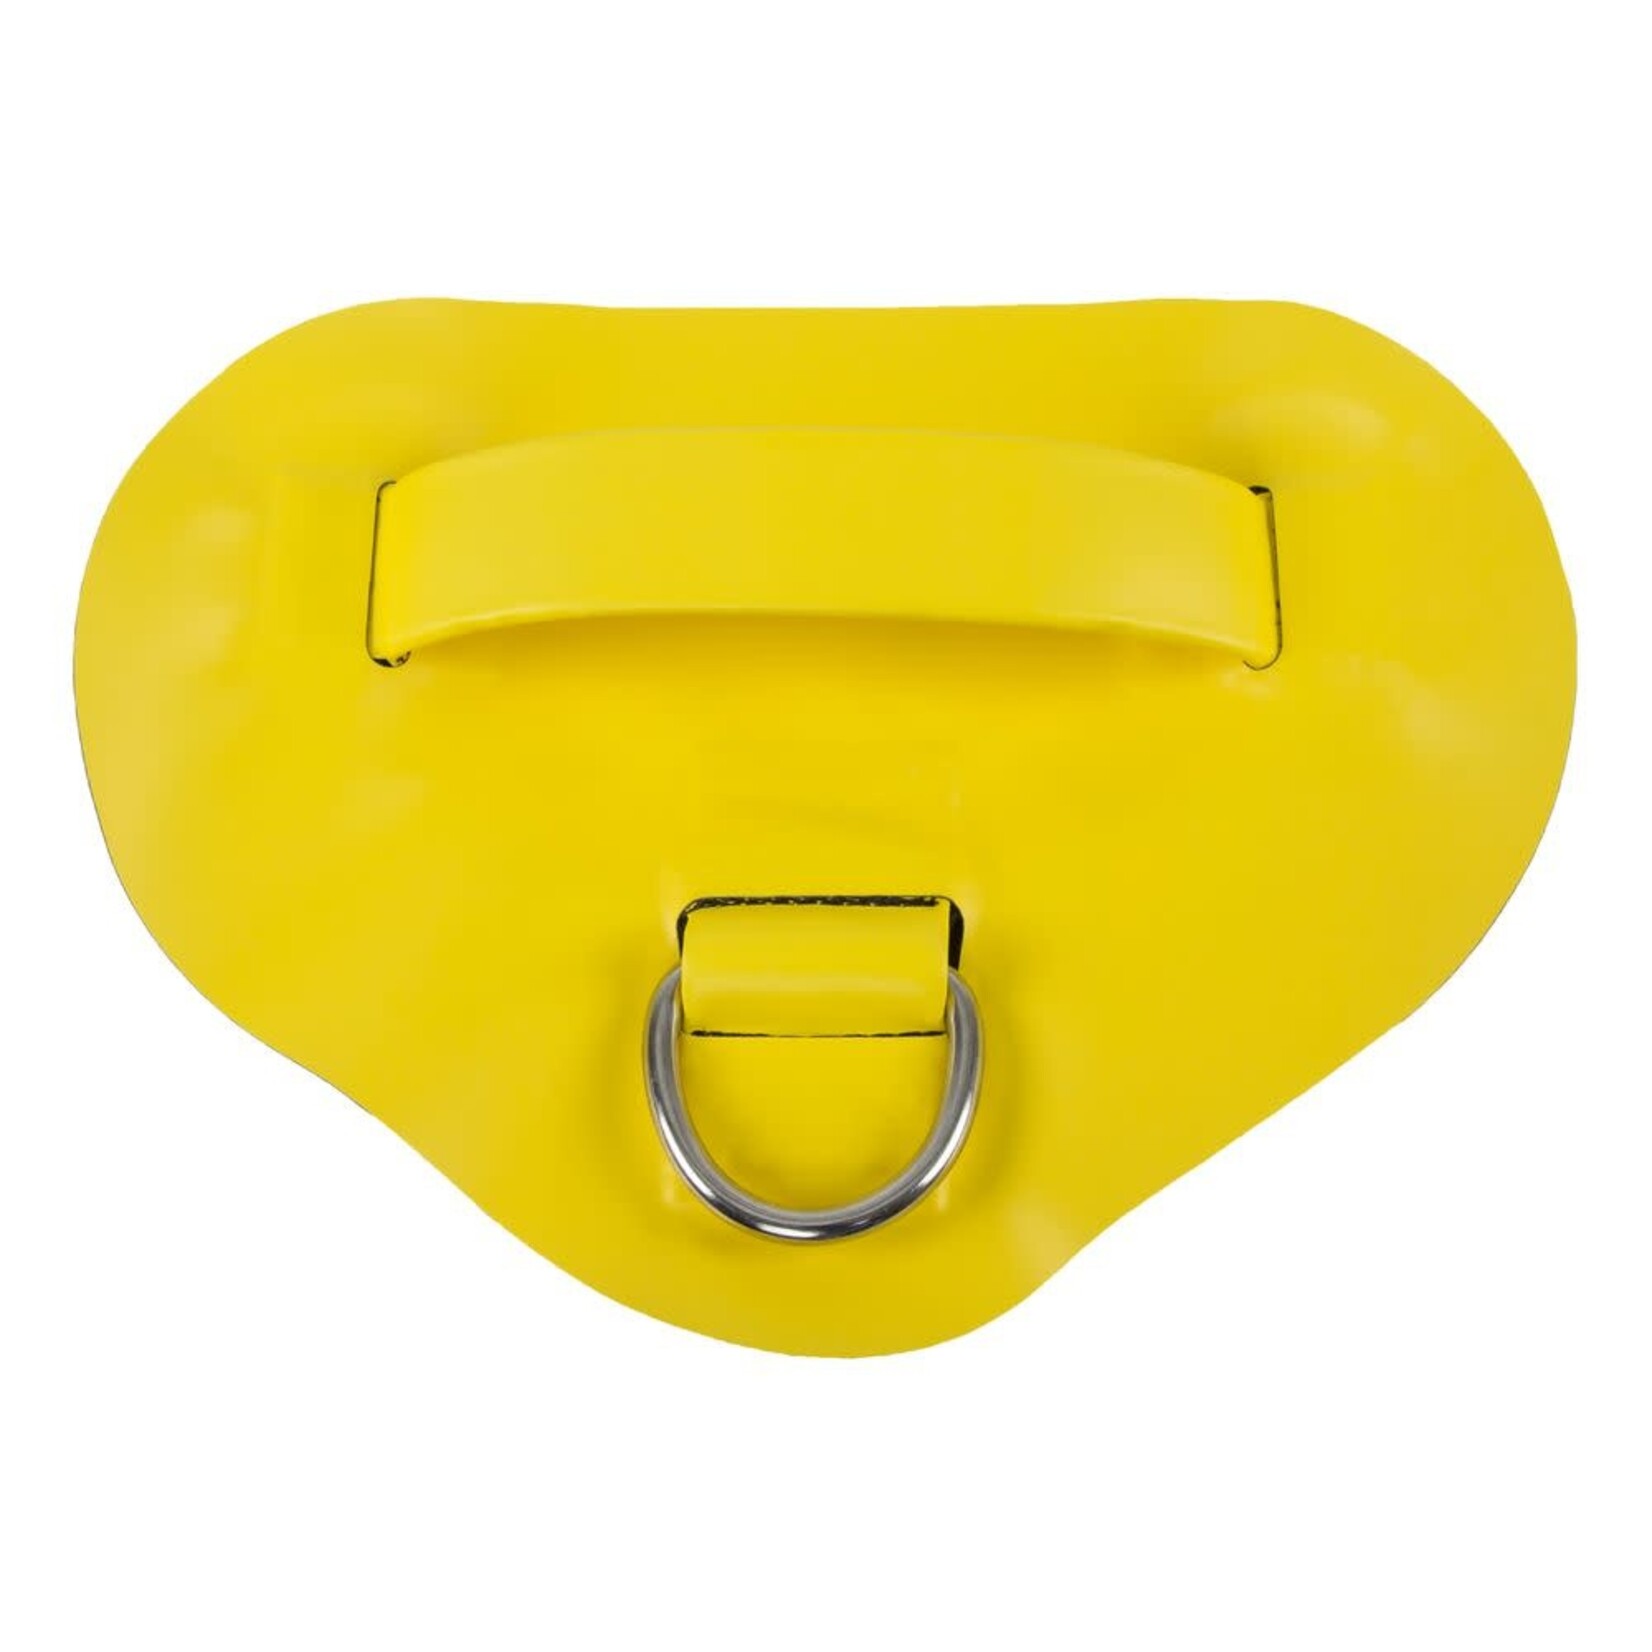 NRS, Inc NRS Bow/Stern 2" D-Ring Carrying Handles